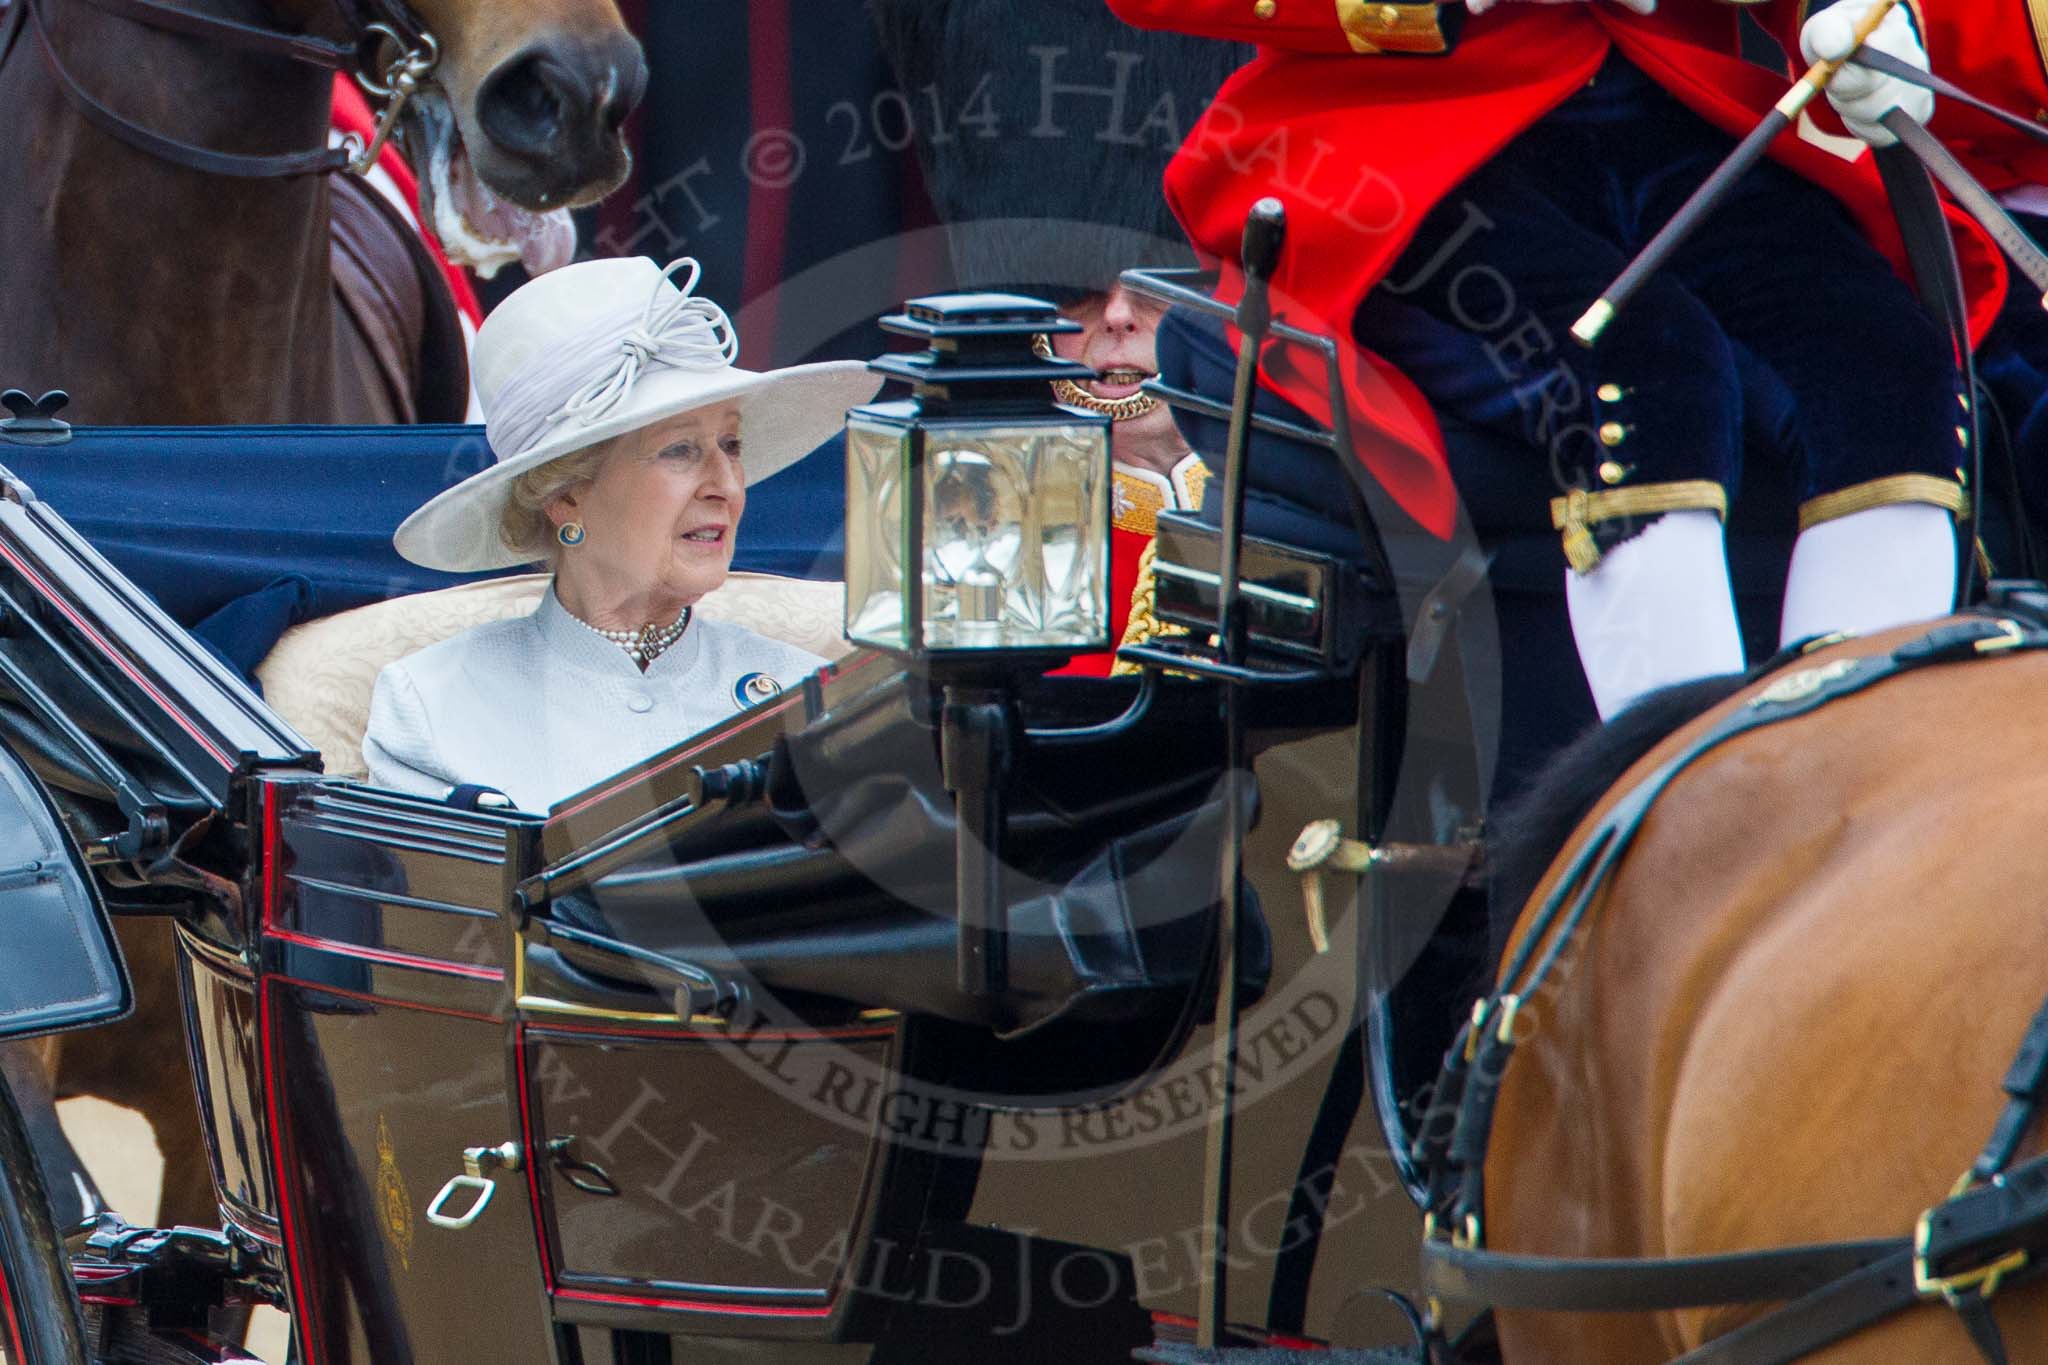 Trooping the Colour 2014.
Horse Guards Parade, Westminster,
London SW1A,

United Kingdom,
on 14 June 2014 at 10:50, image #280